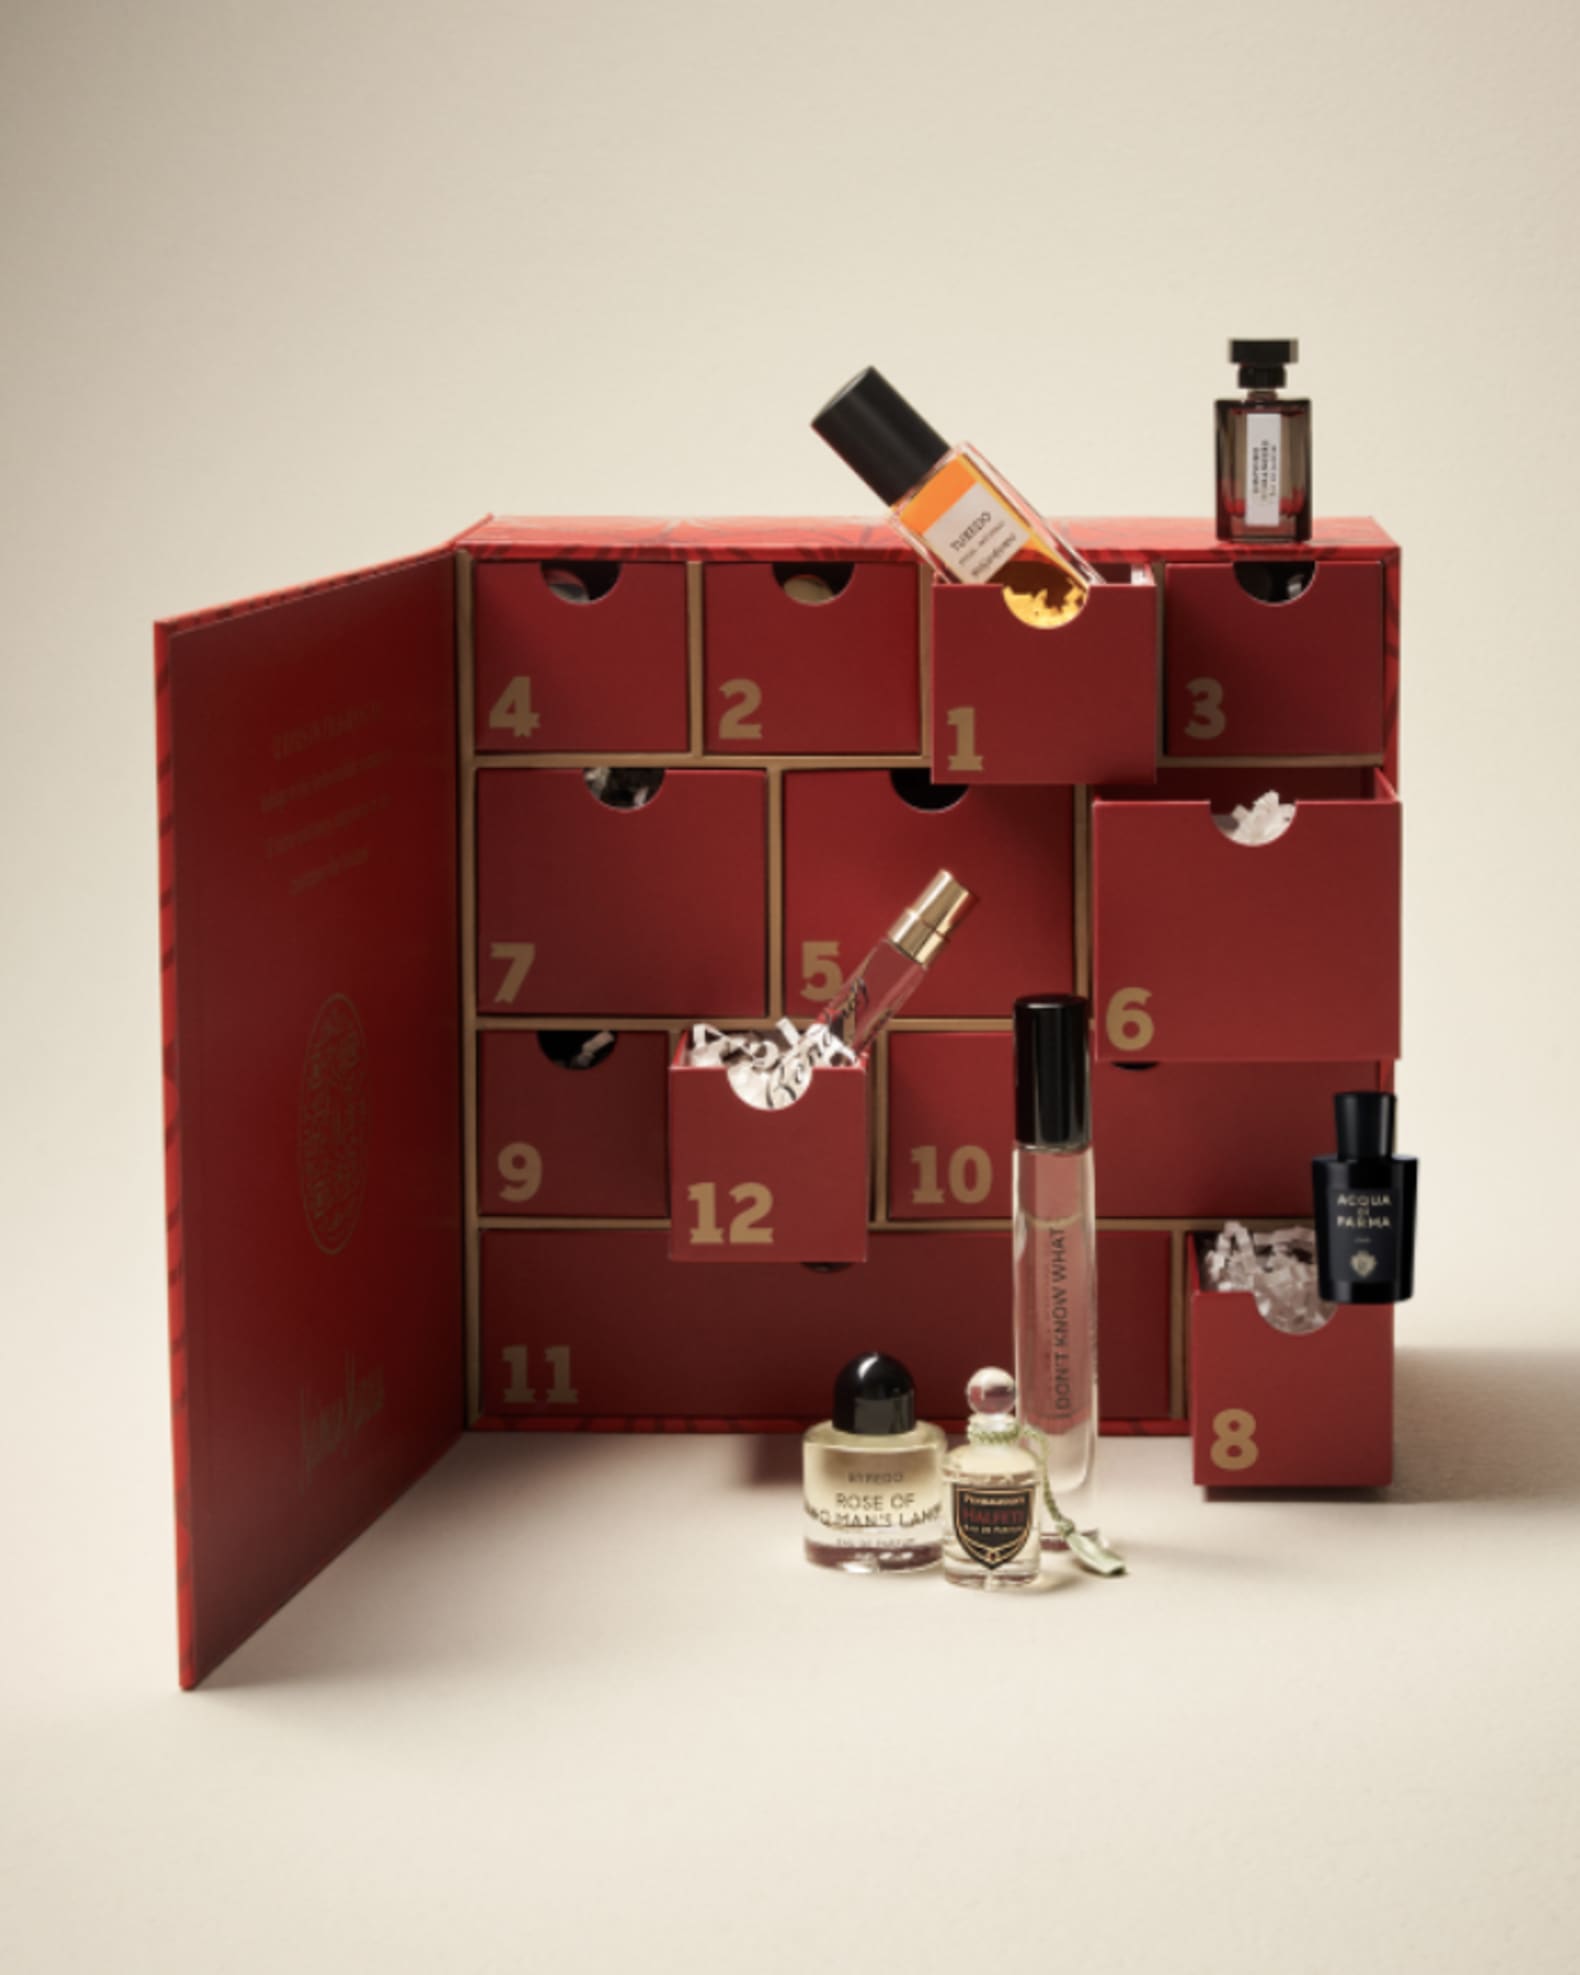 24 Days Of Christmas Advent Calendar by Glasshouse Fragrances Online, THE  ICONIC